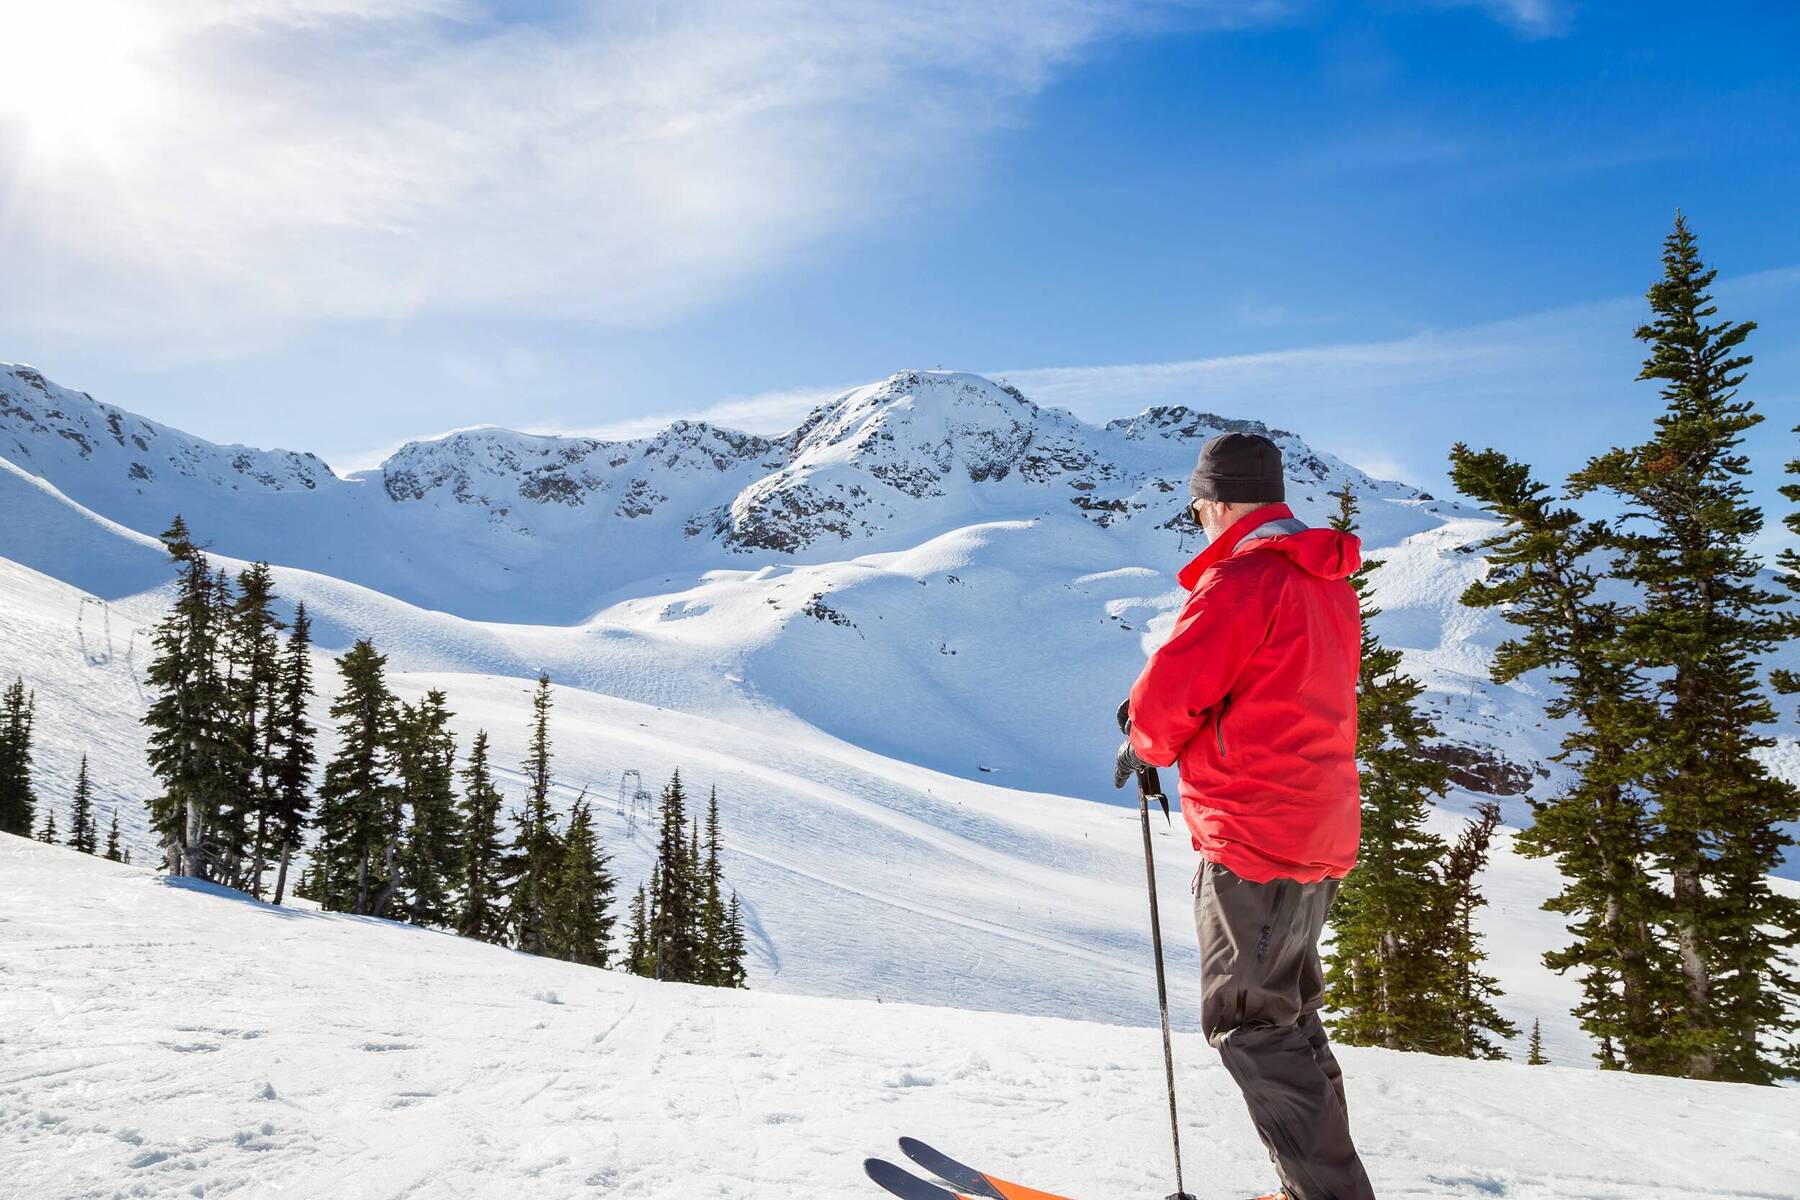 Luxury skiing in Whistler, Canada